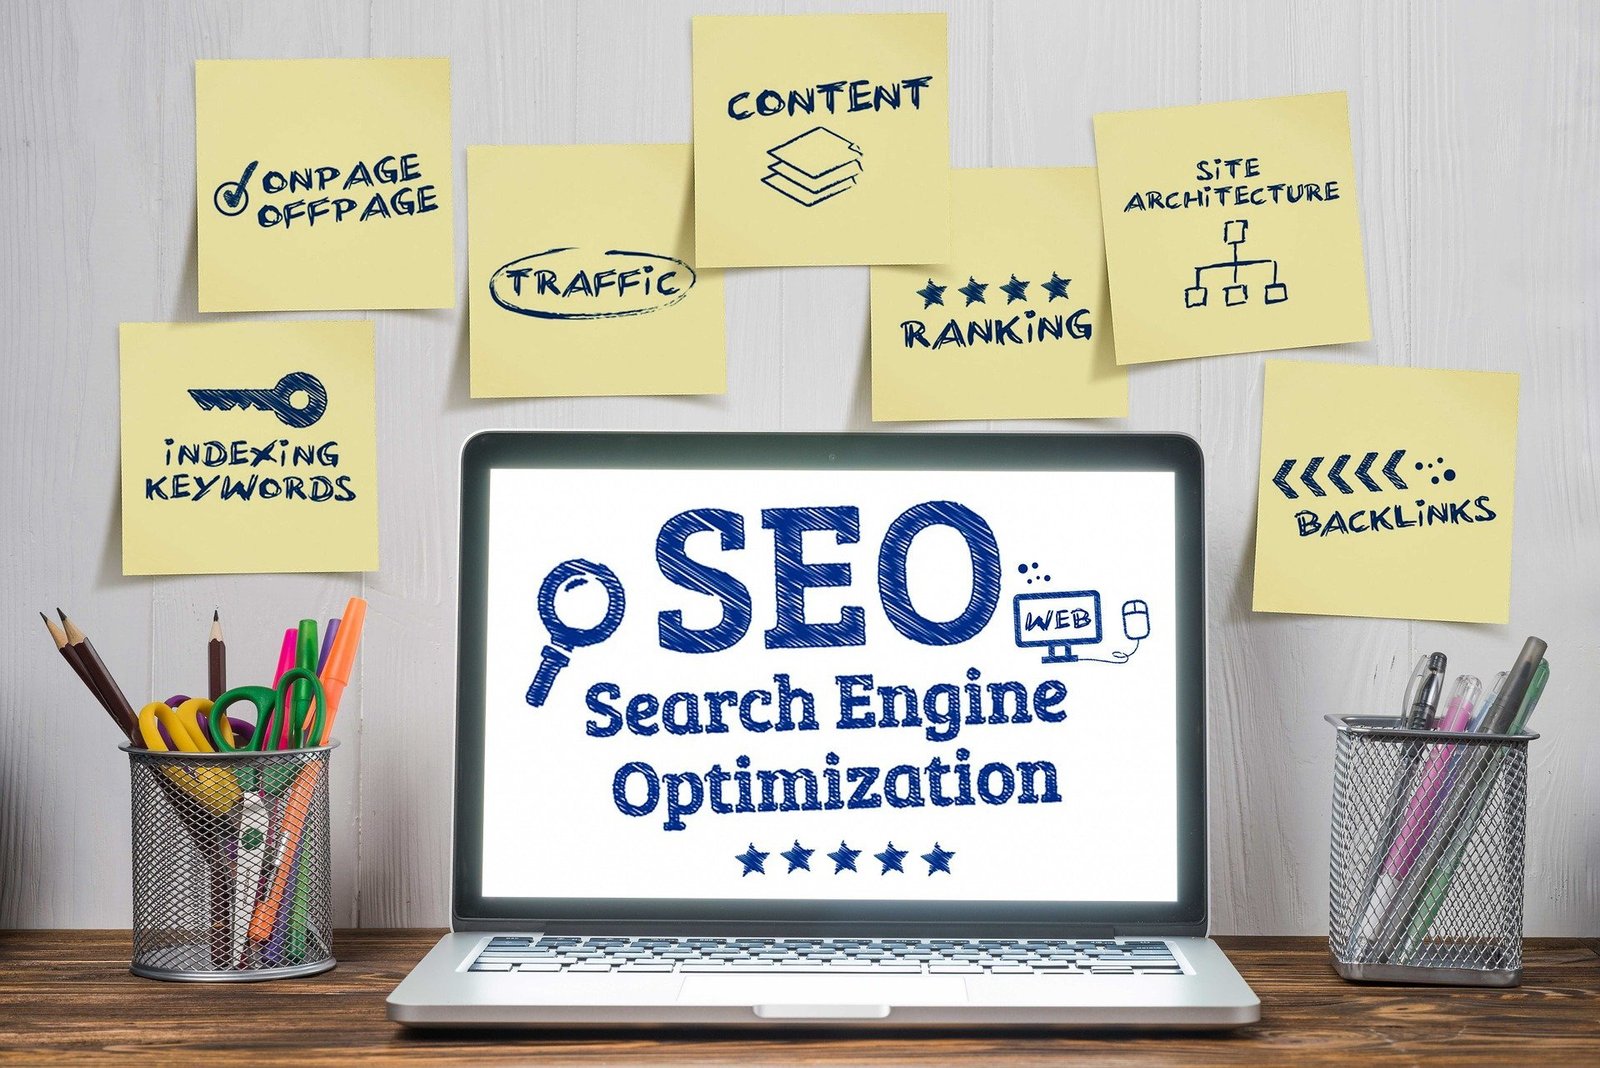 seo packages for small business